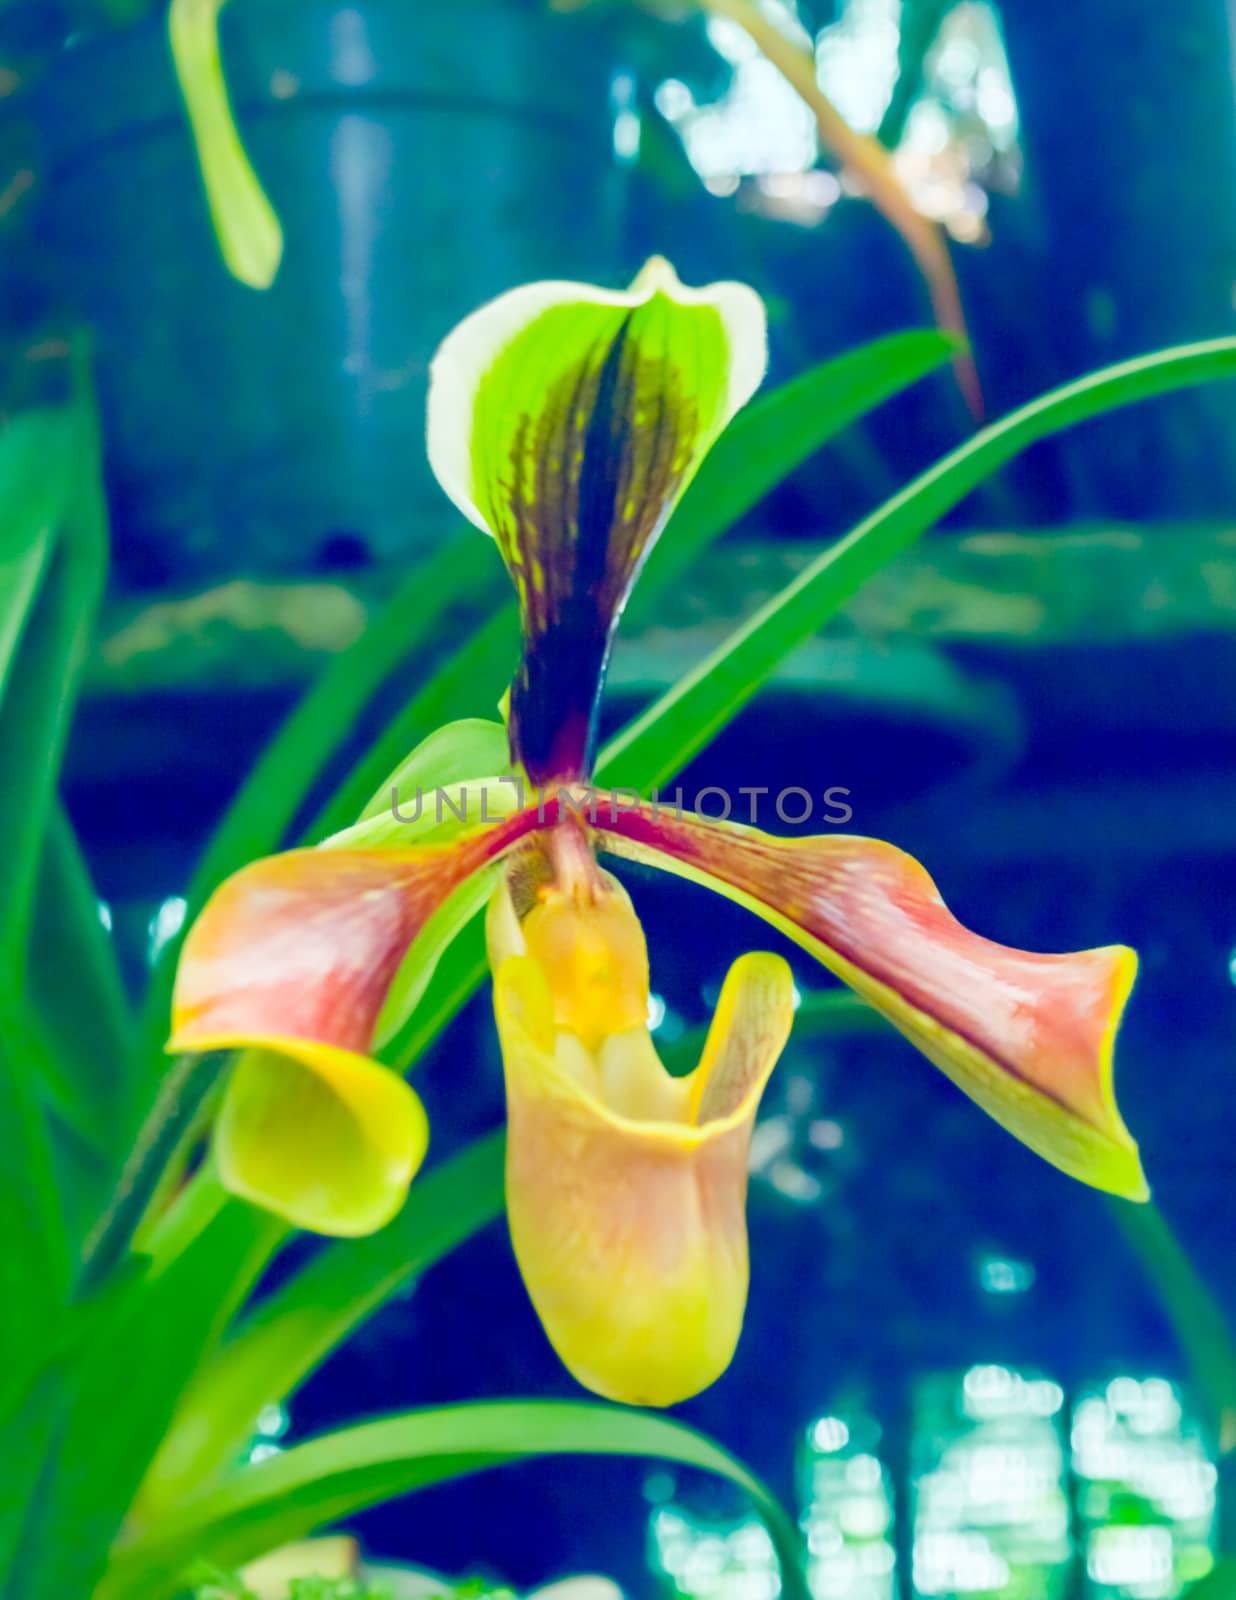 Hard-leaved Pocket Orchid (Paphiopedilum micranthum) commonly known as the Silver Slipper Orchid or Pocket Orchid. It blooms during late winter to early summer with one flower per inflorescence. by sudiptabhowmick